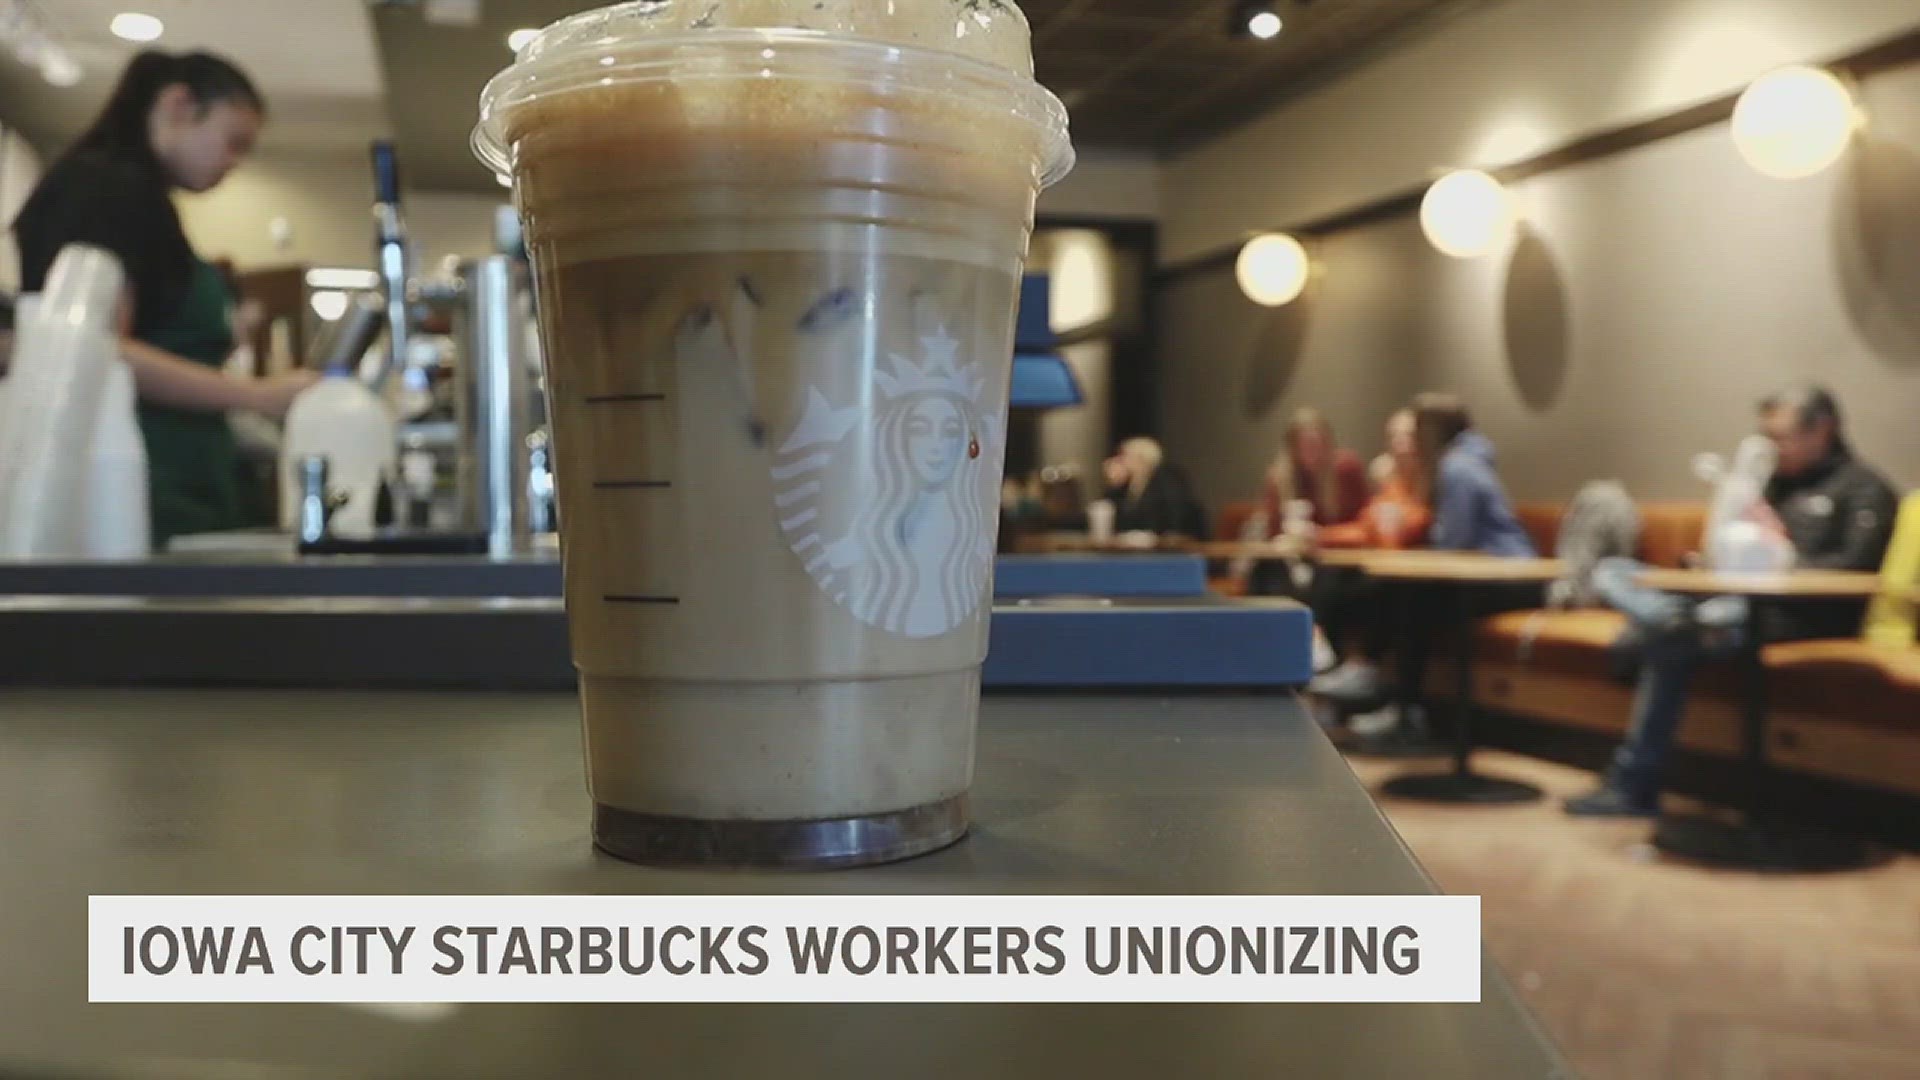 One Iowa City worker said that the employees decided to take action after reaching a "breaking point" with management.